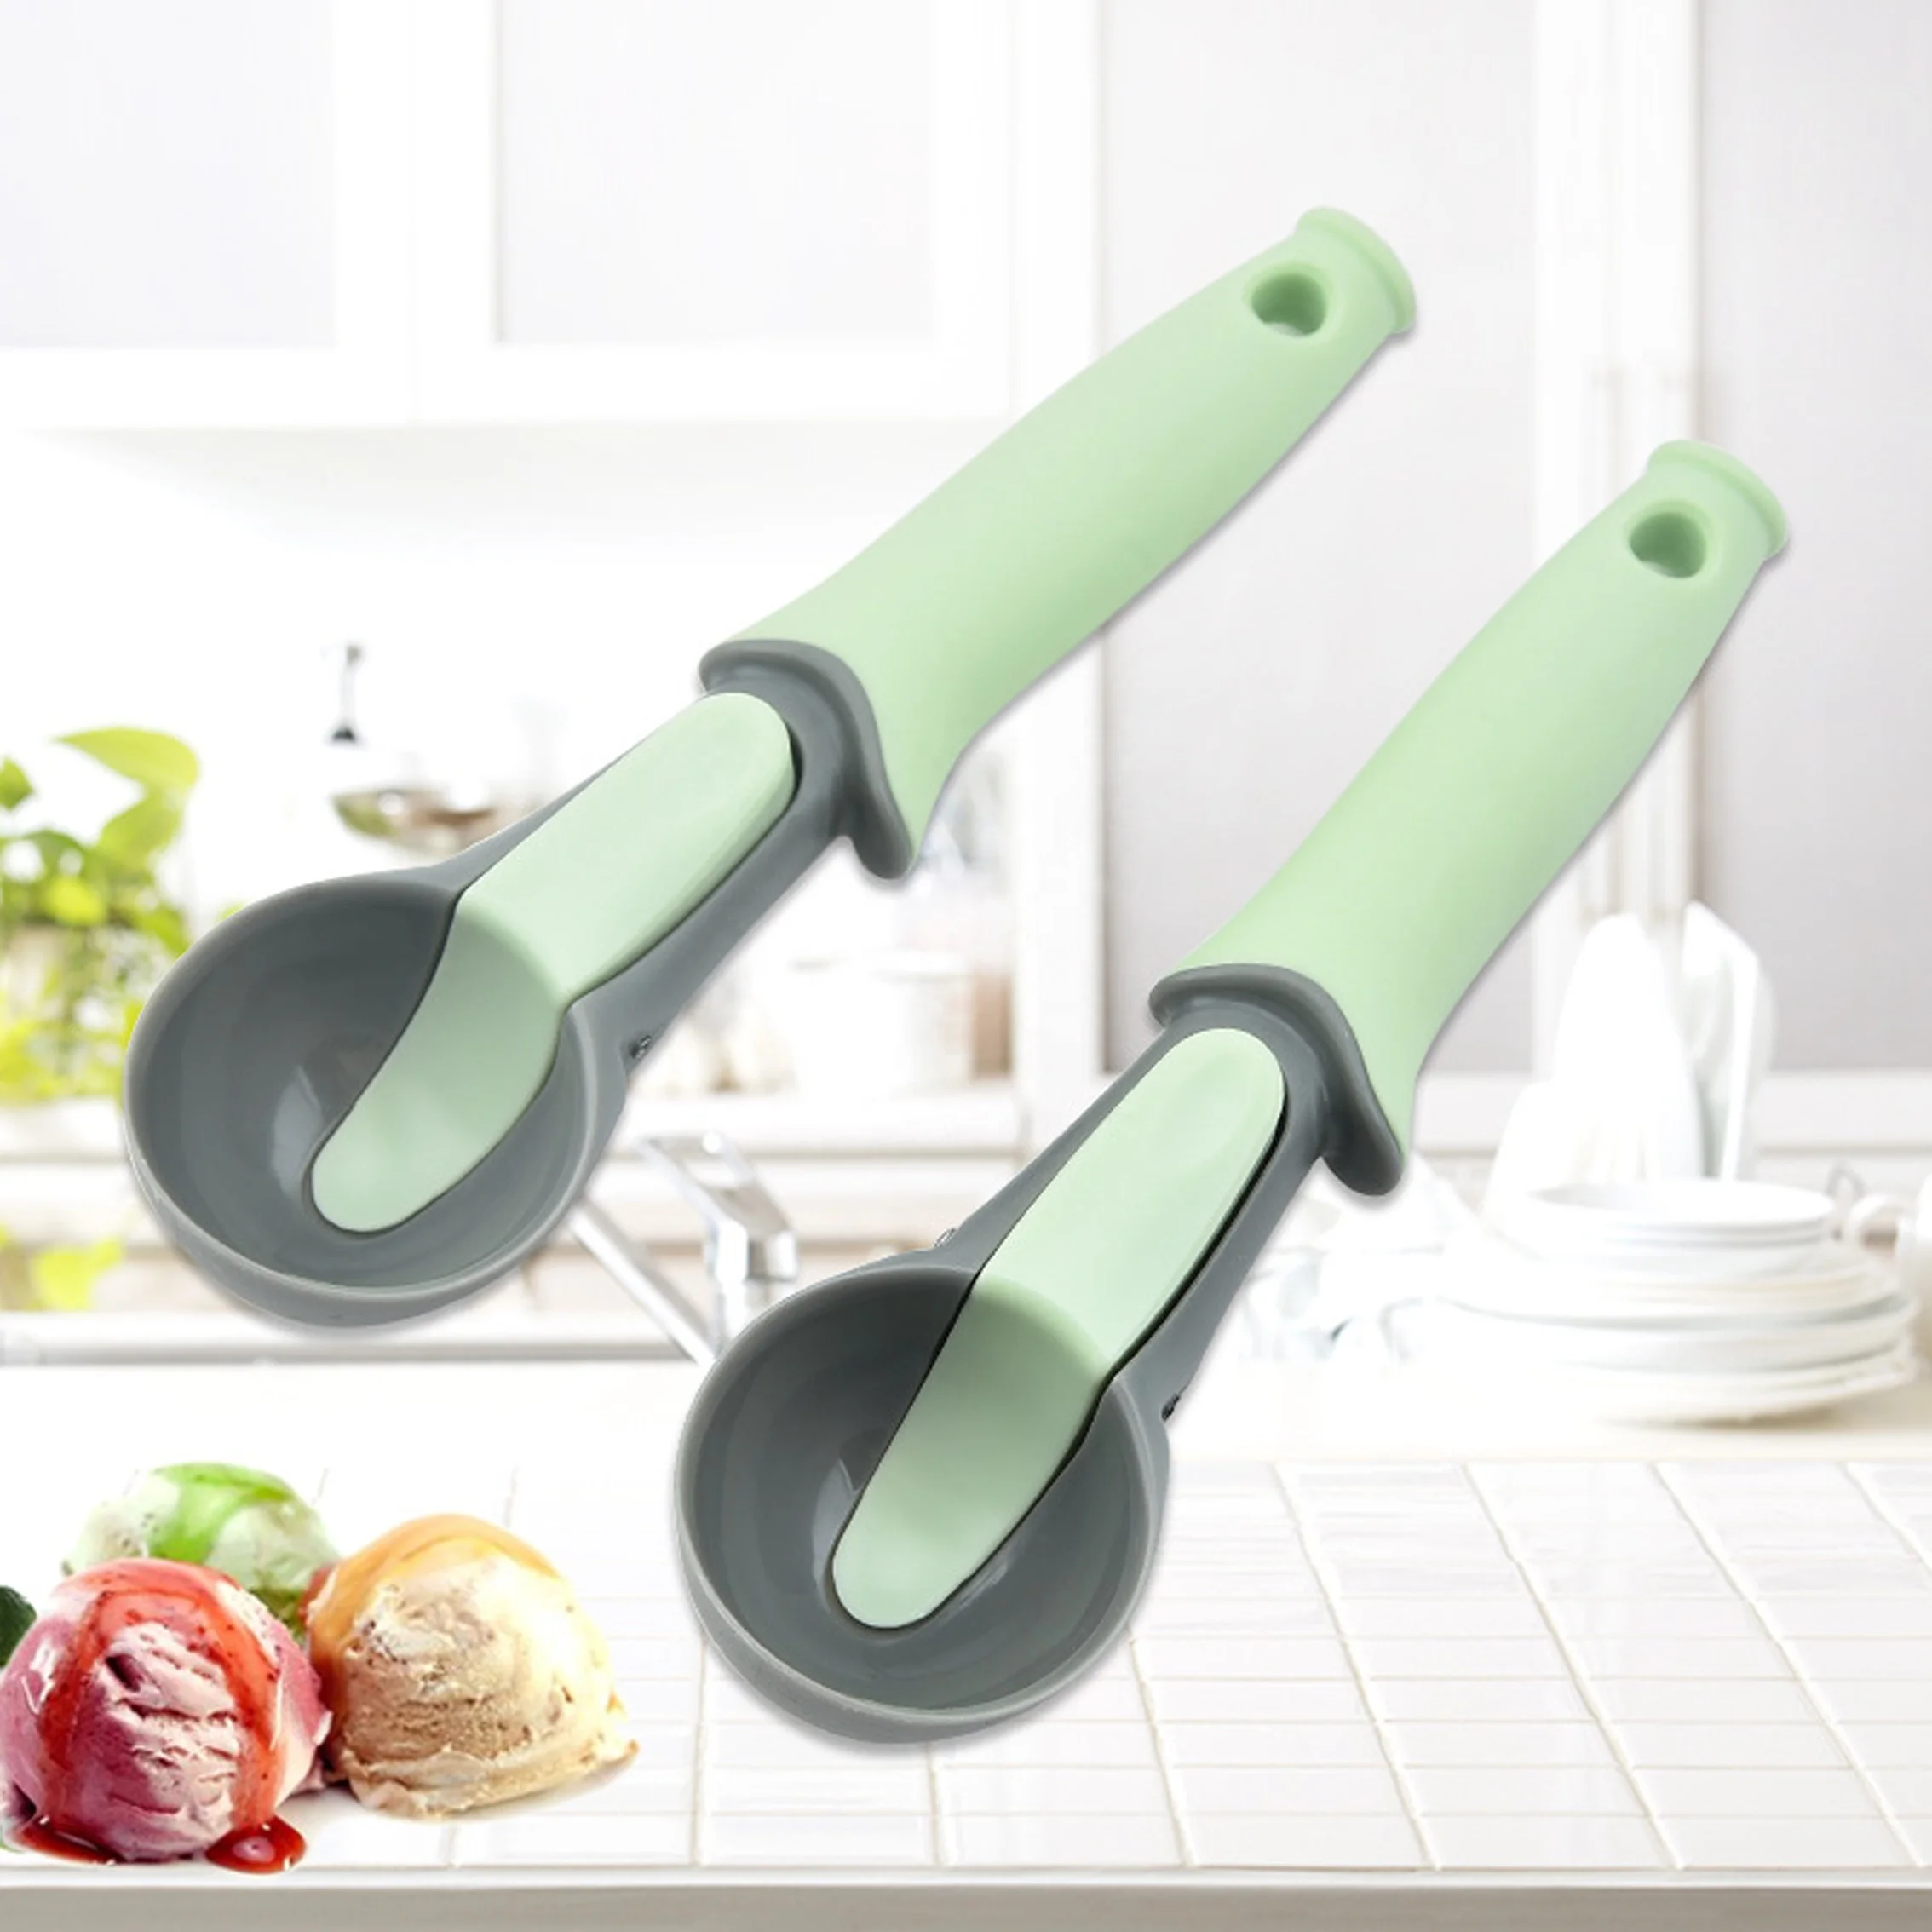 

Hot selling Fruit plastic cookie scoop Watermelon Ball shape Maker Ice Cream Spoon with handle, Green,black